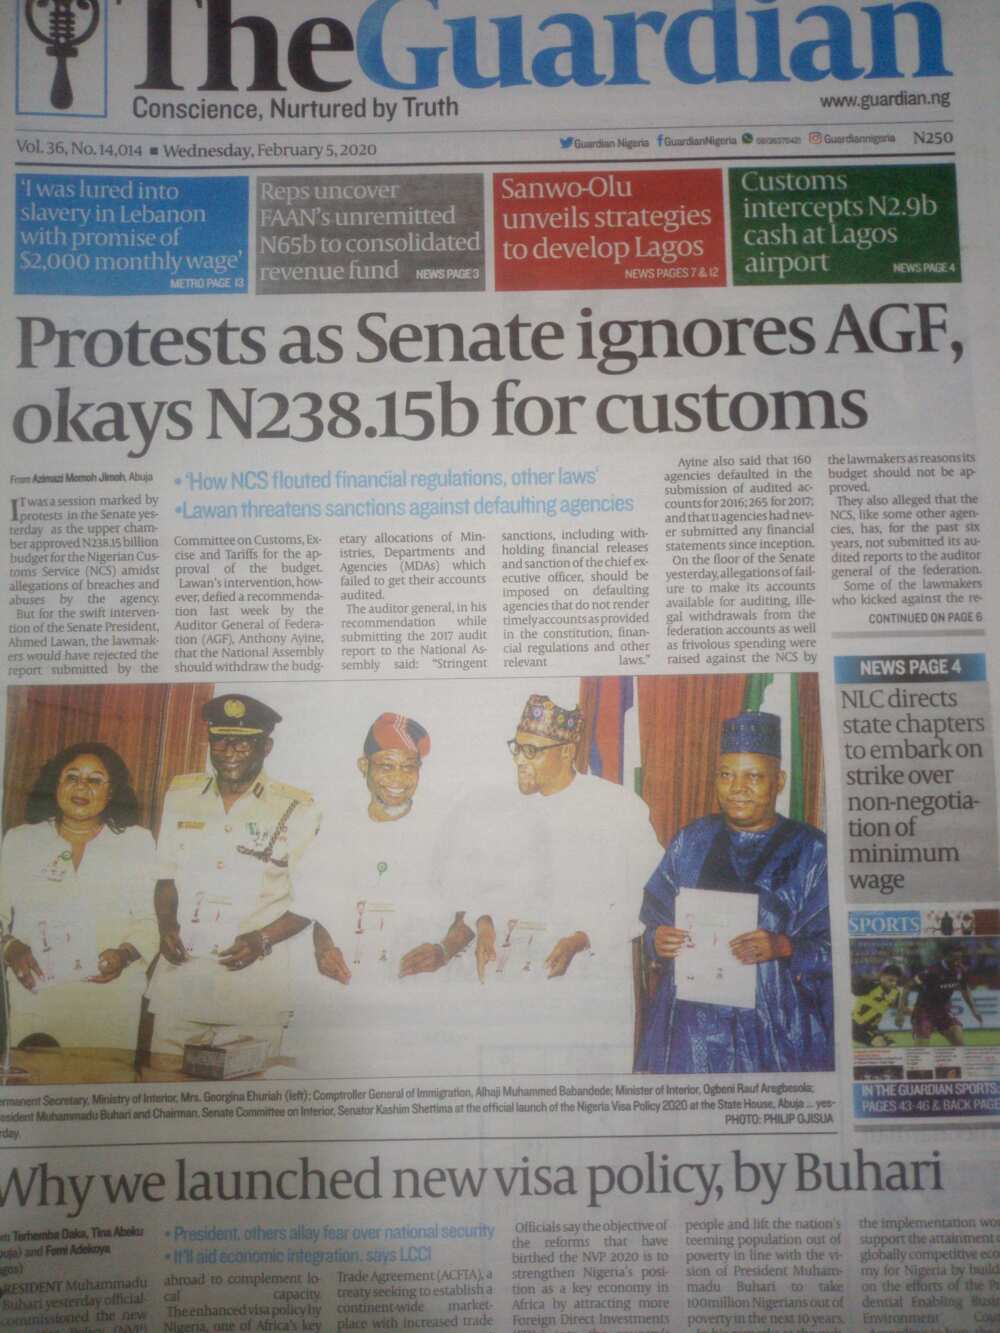 The Guardian newspaper review of February 5